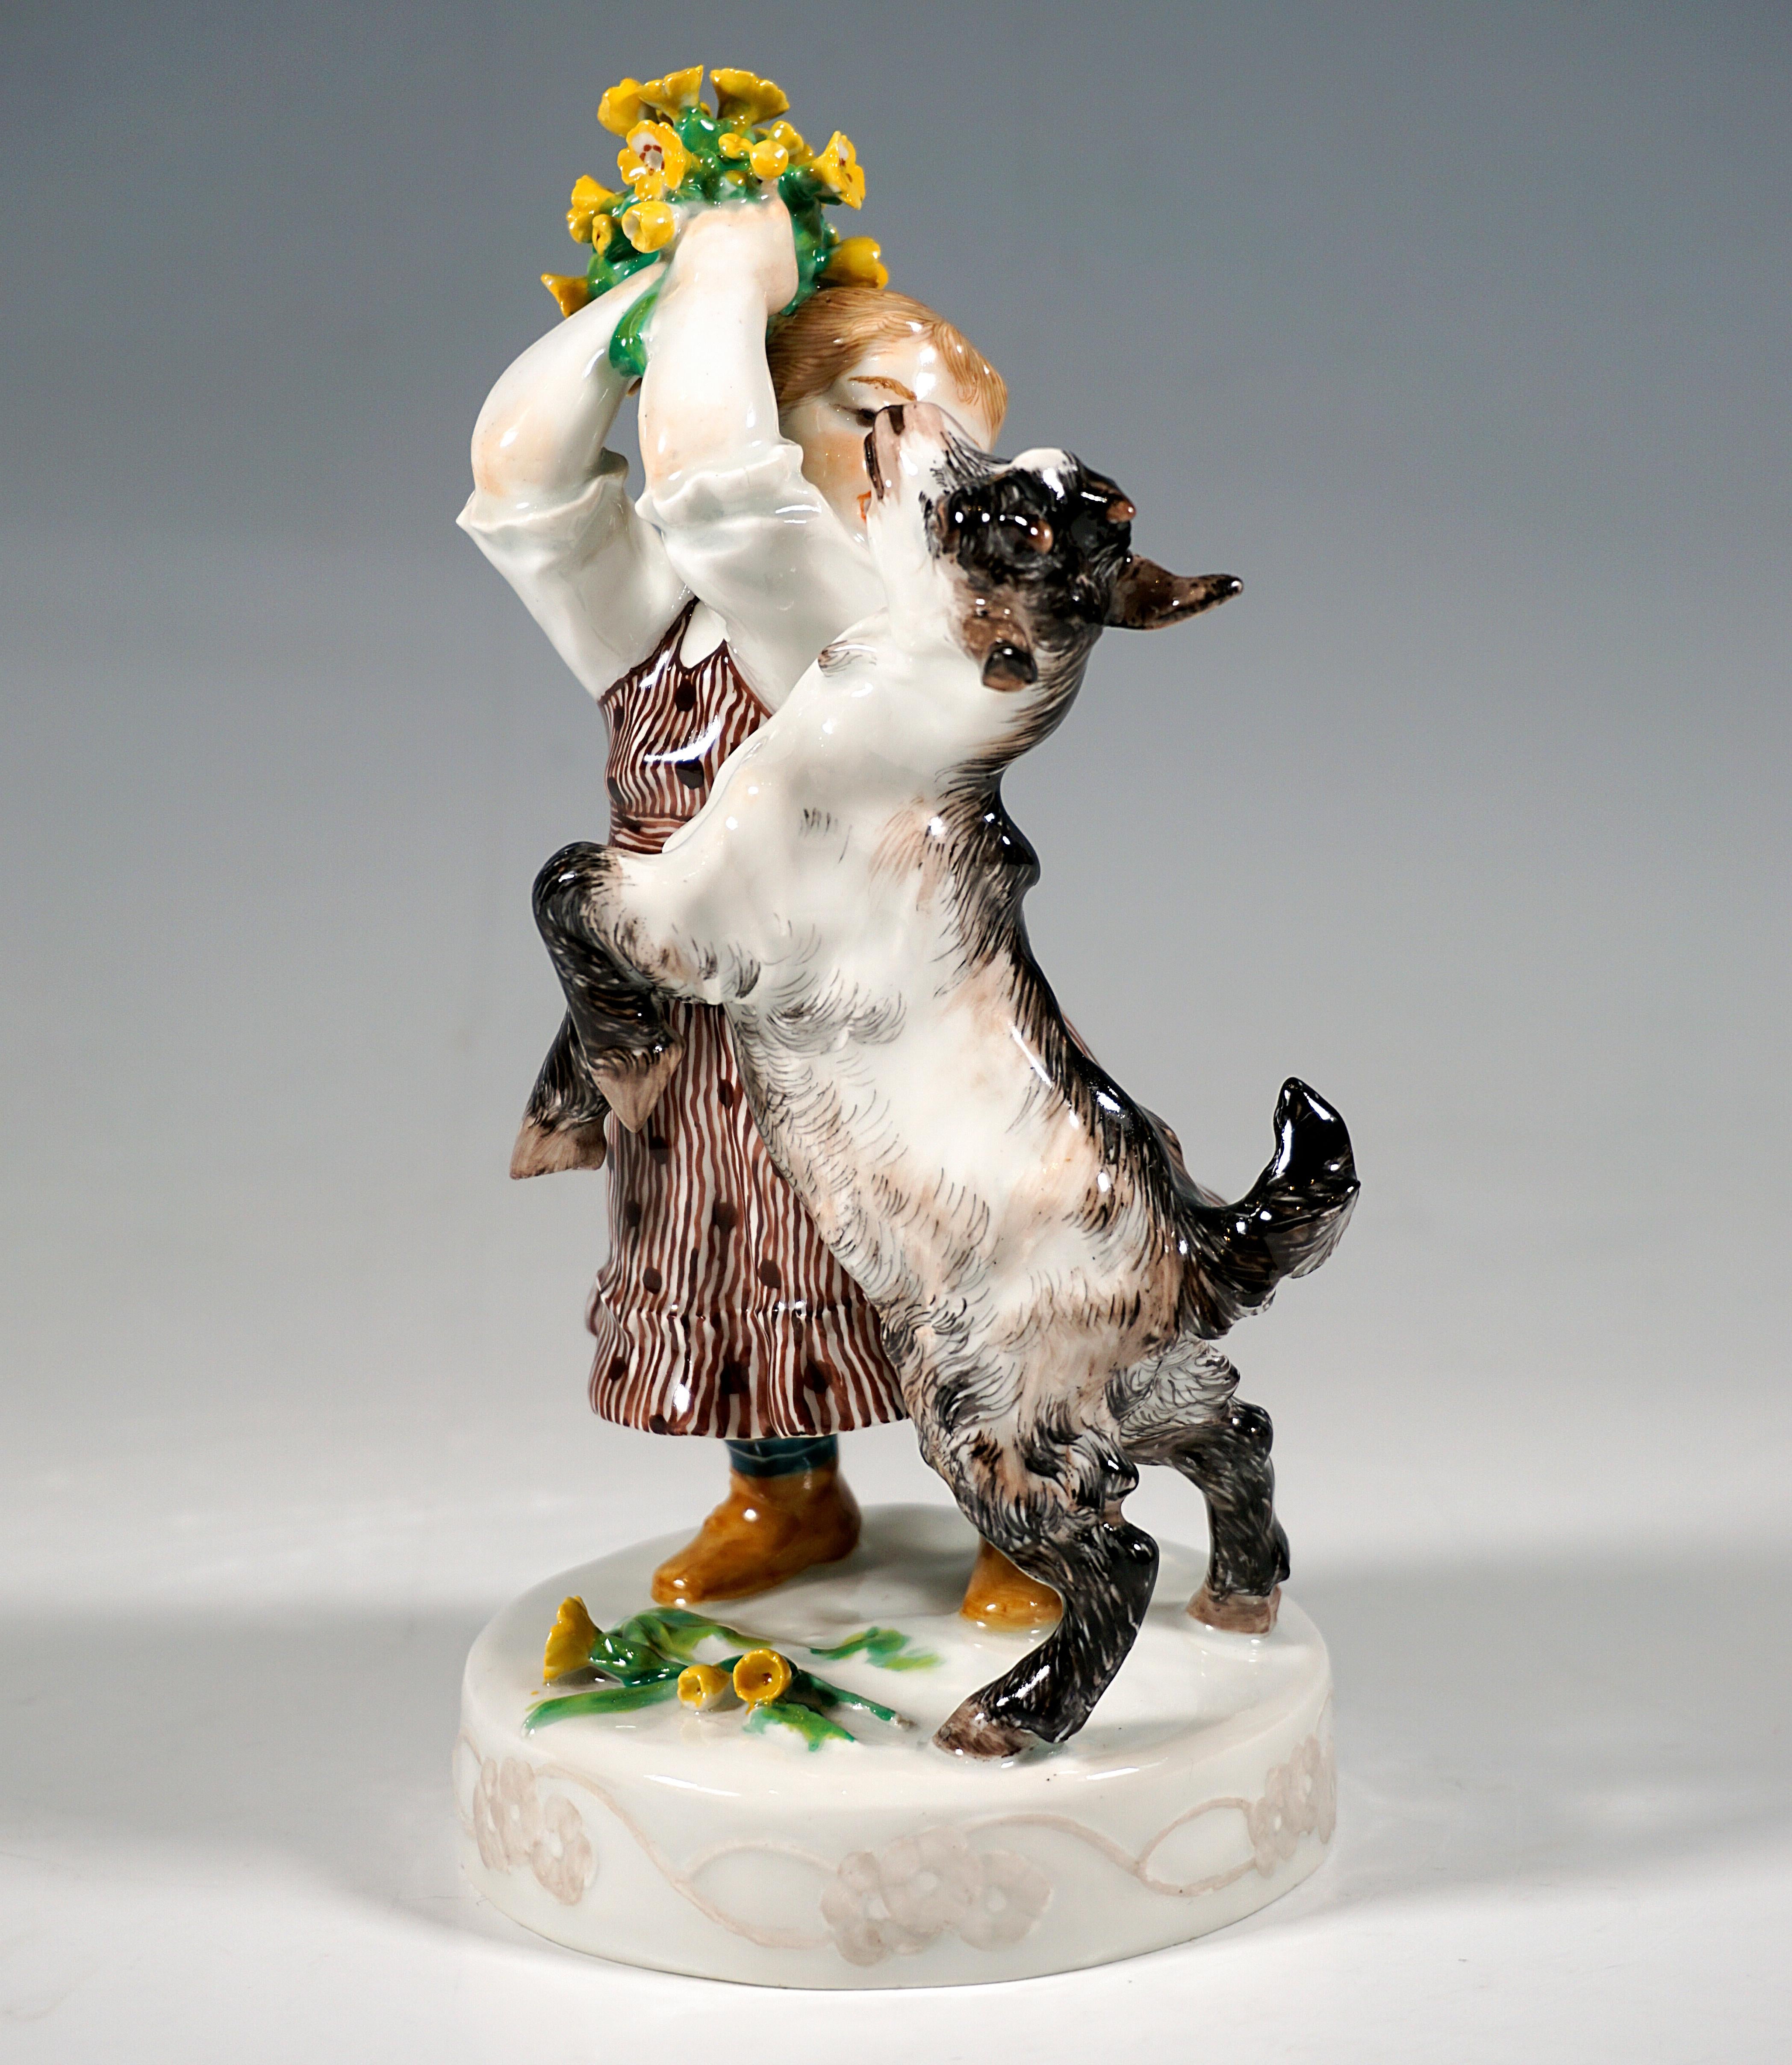 Very rare Meissen Art Nouveau porcelain group:
Girl in a striped dress with polka dots and a white blouse holding a bouquet of flowers in both hands above her head and fending off a ravenous goat that jumps up on her.
The group is based on a white